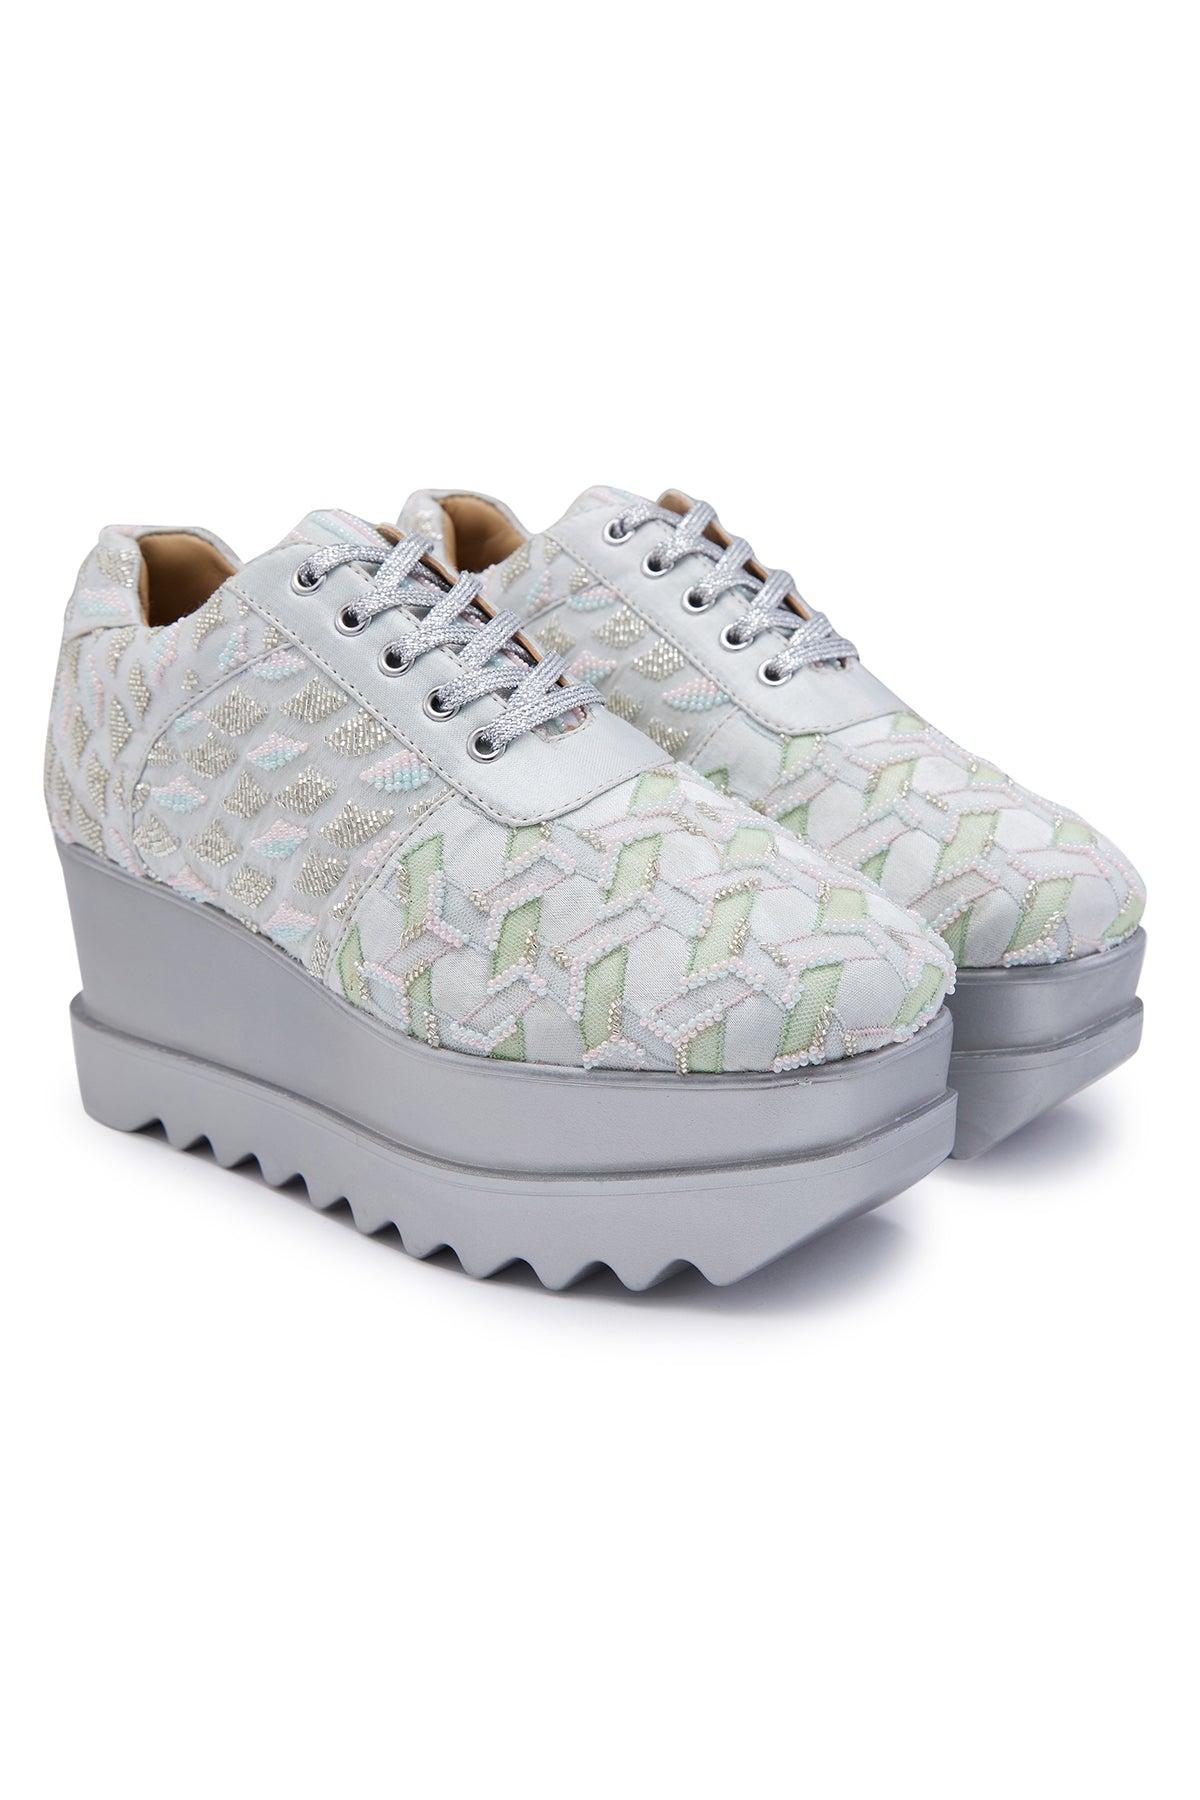 Notting Hill Wedge Sneakers